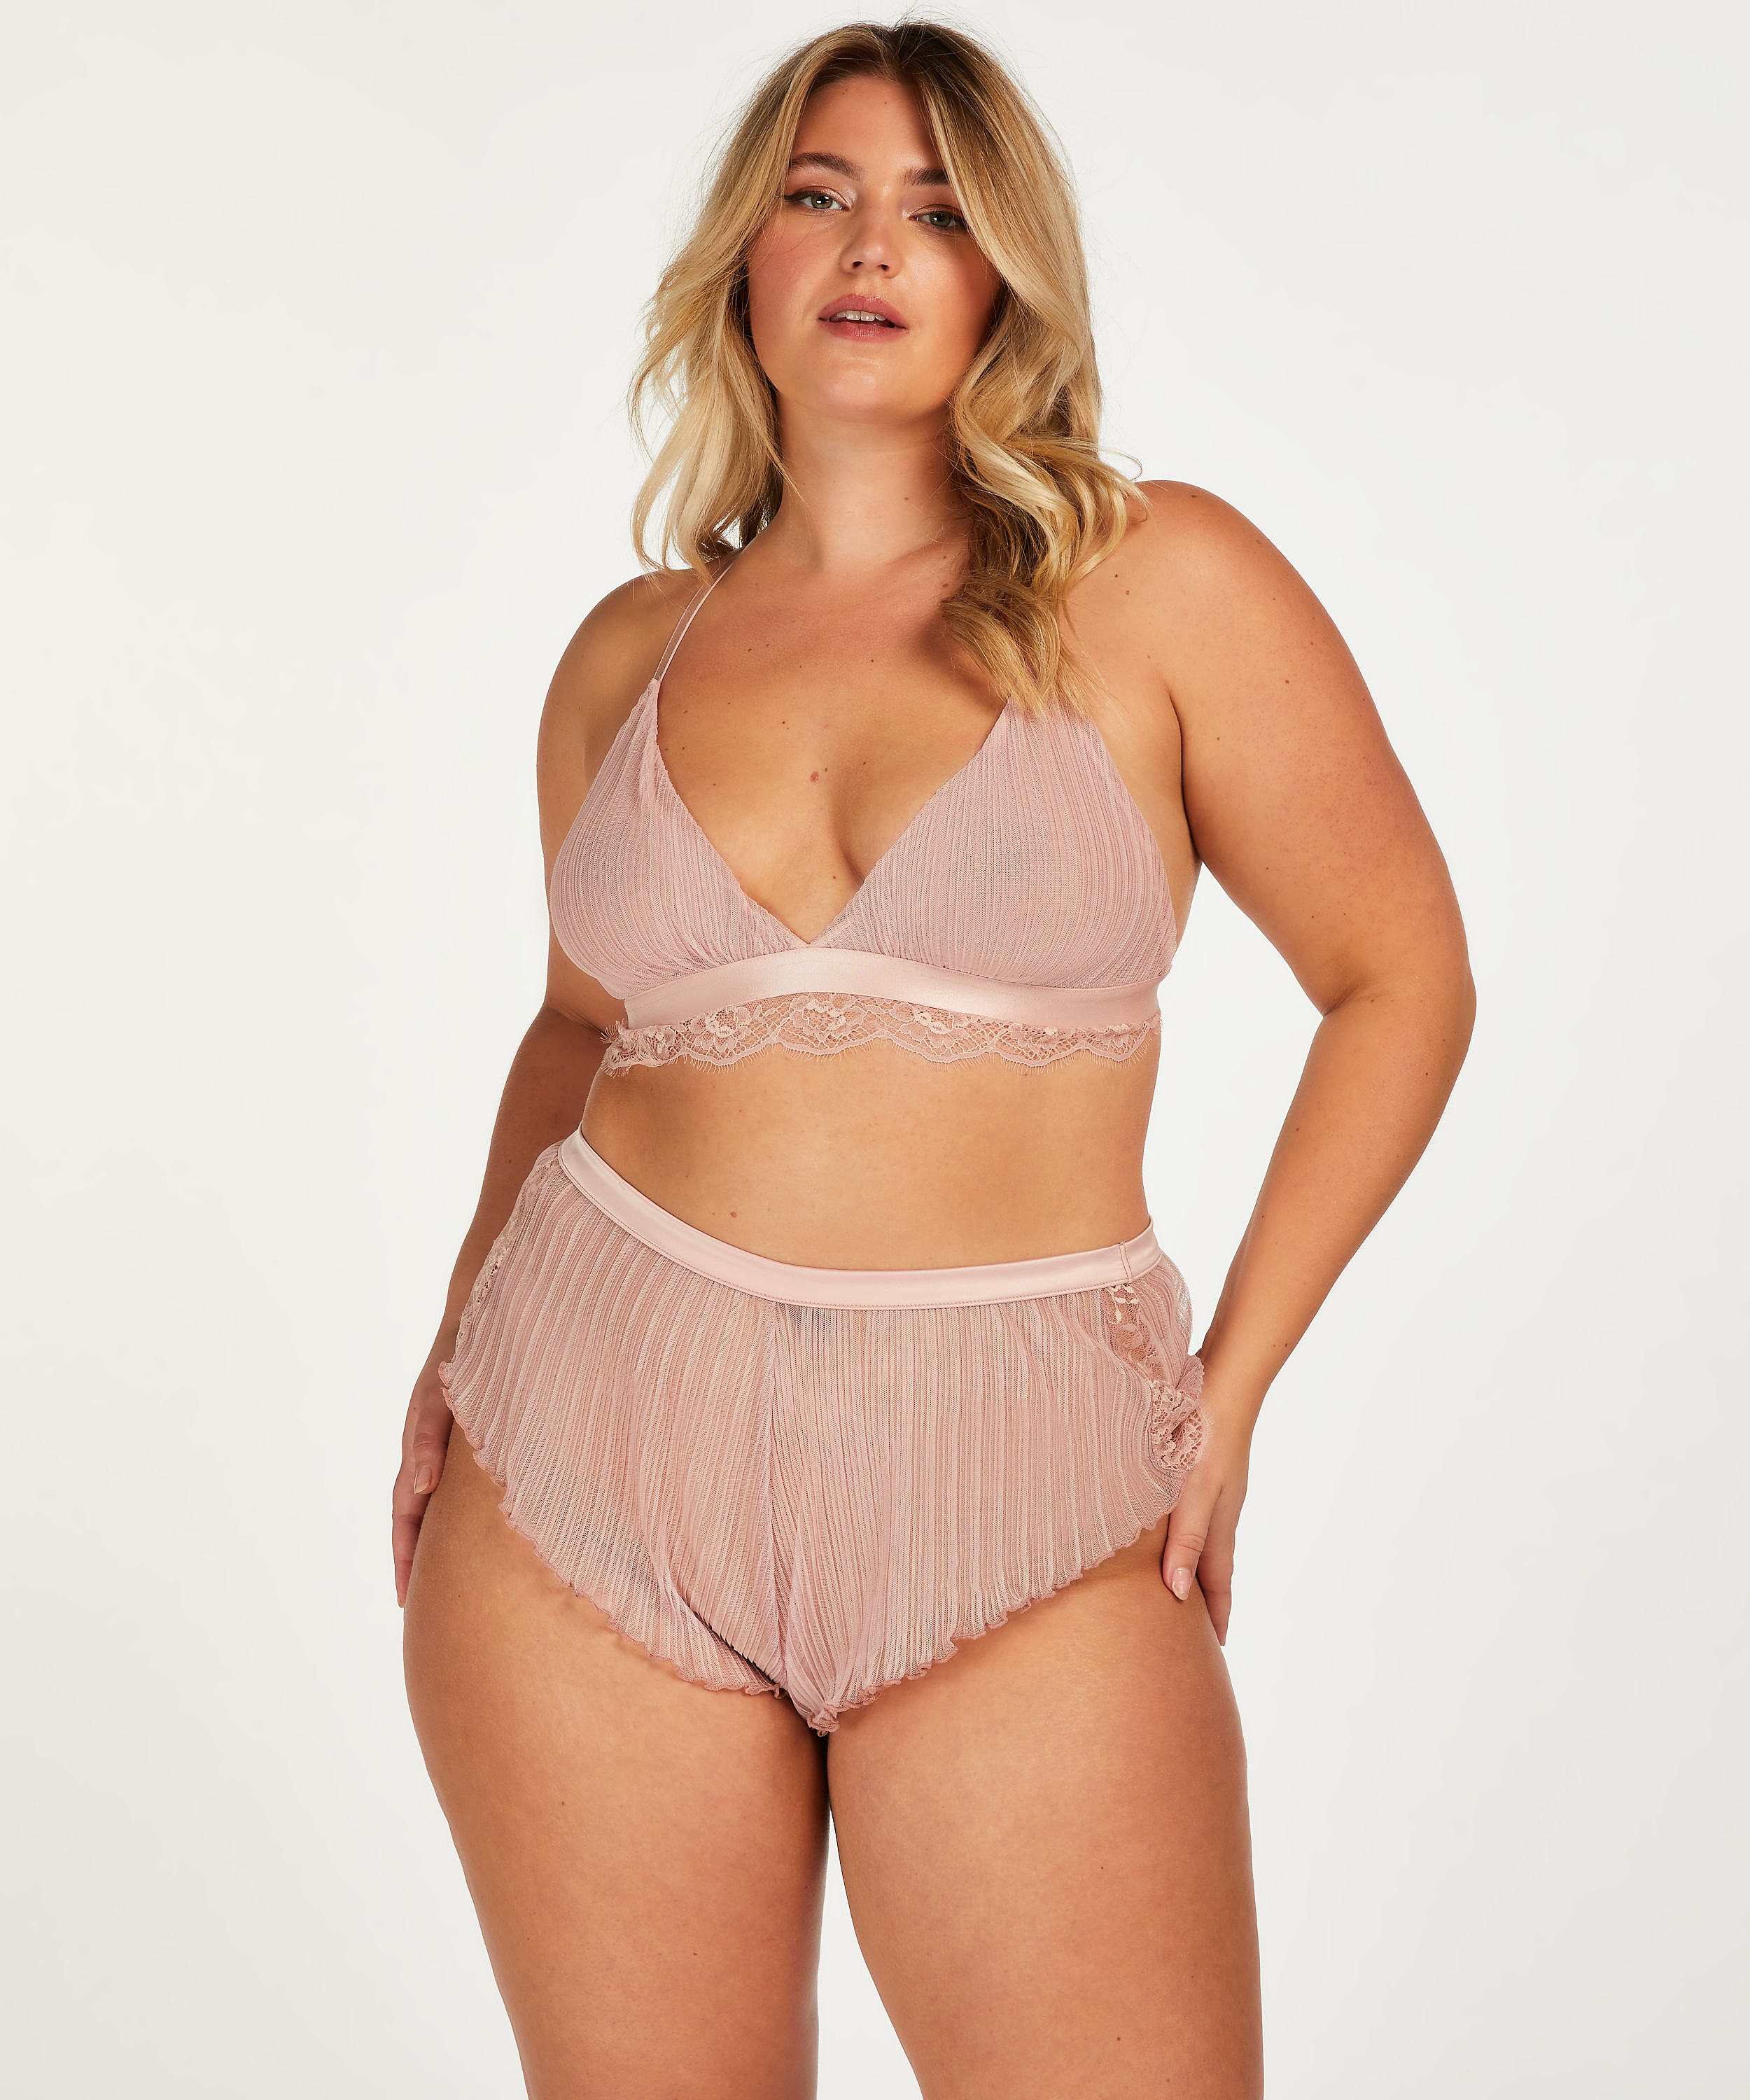 Elissa French Knickers, Pink, main